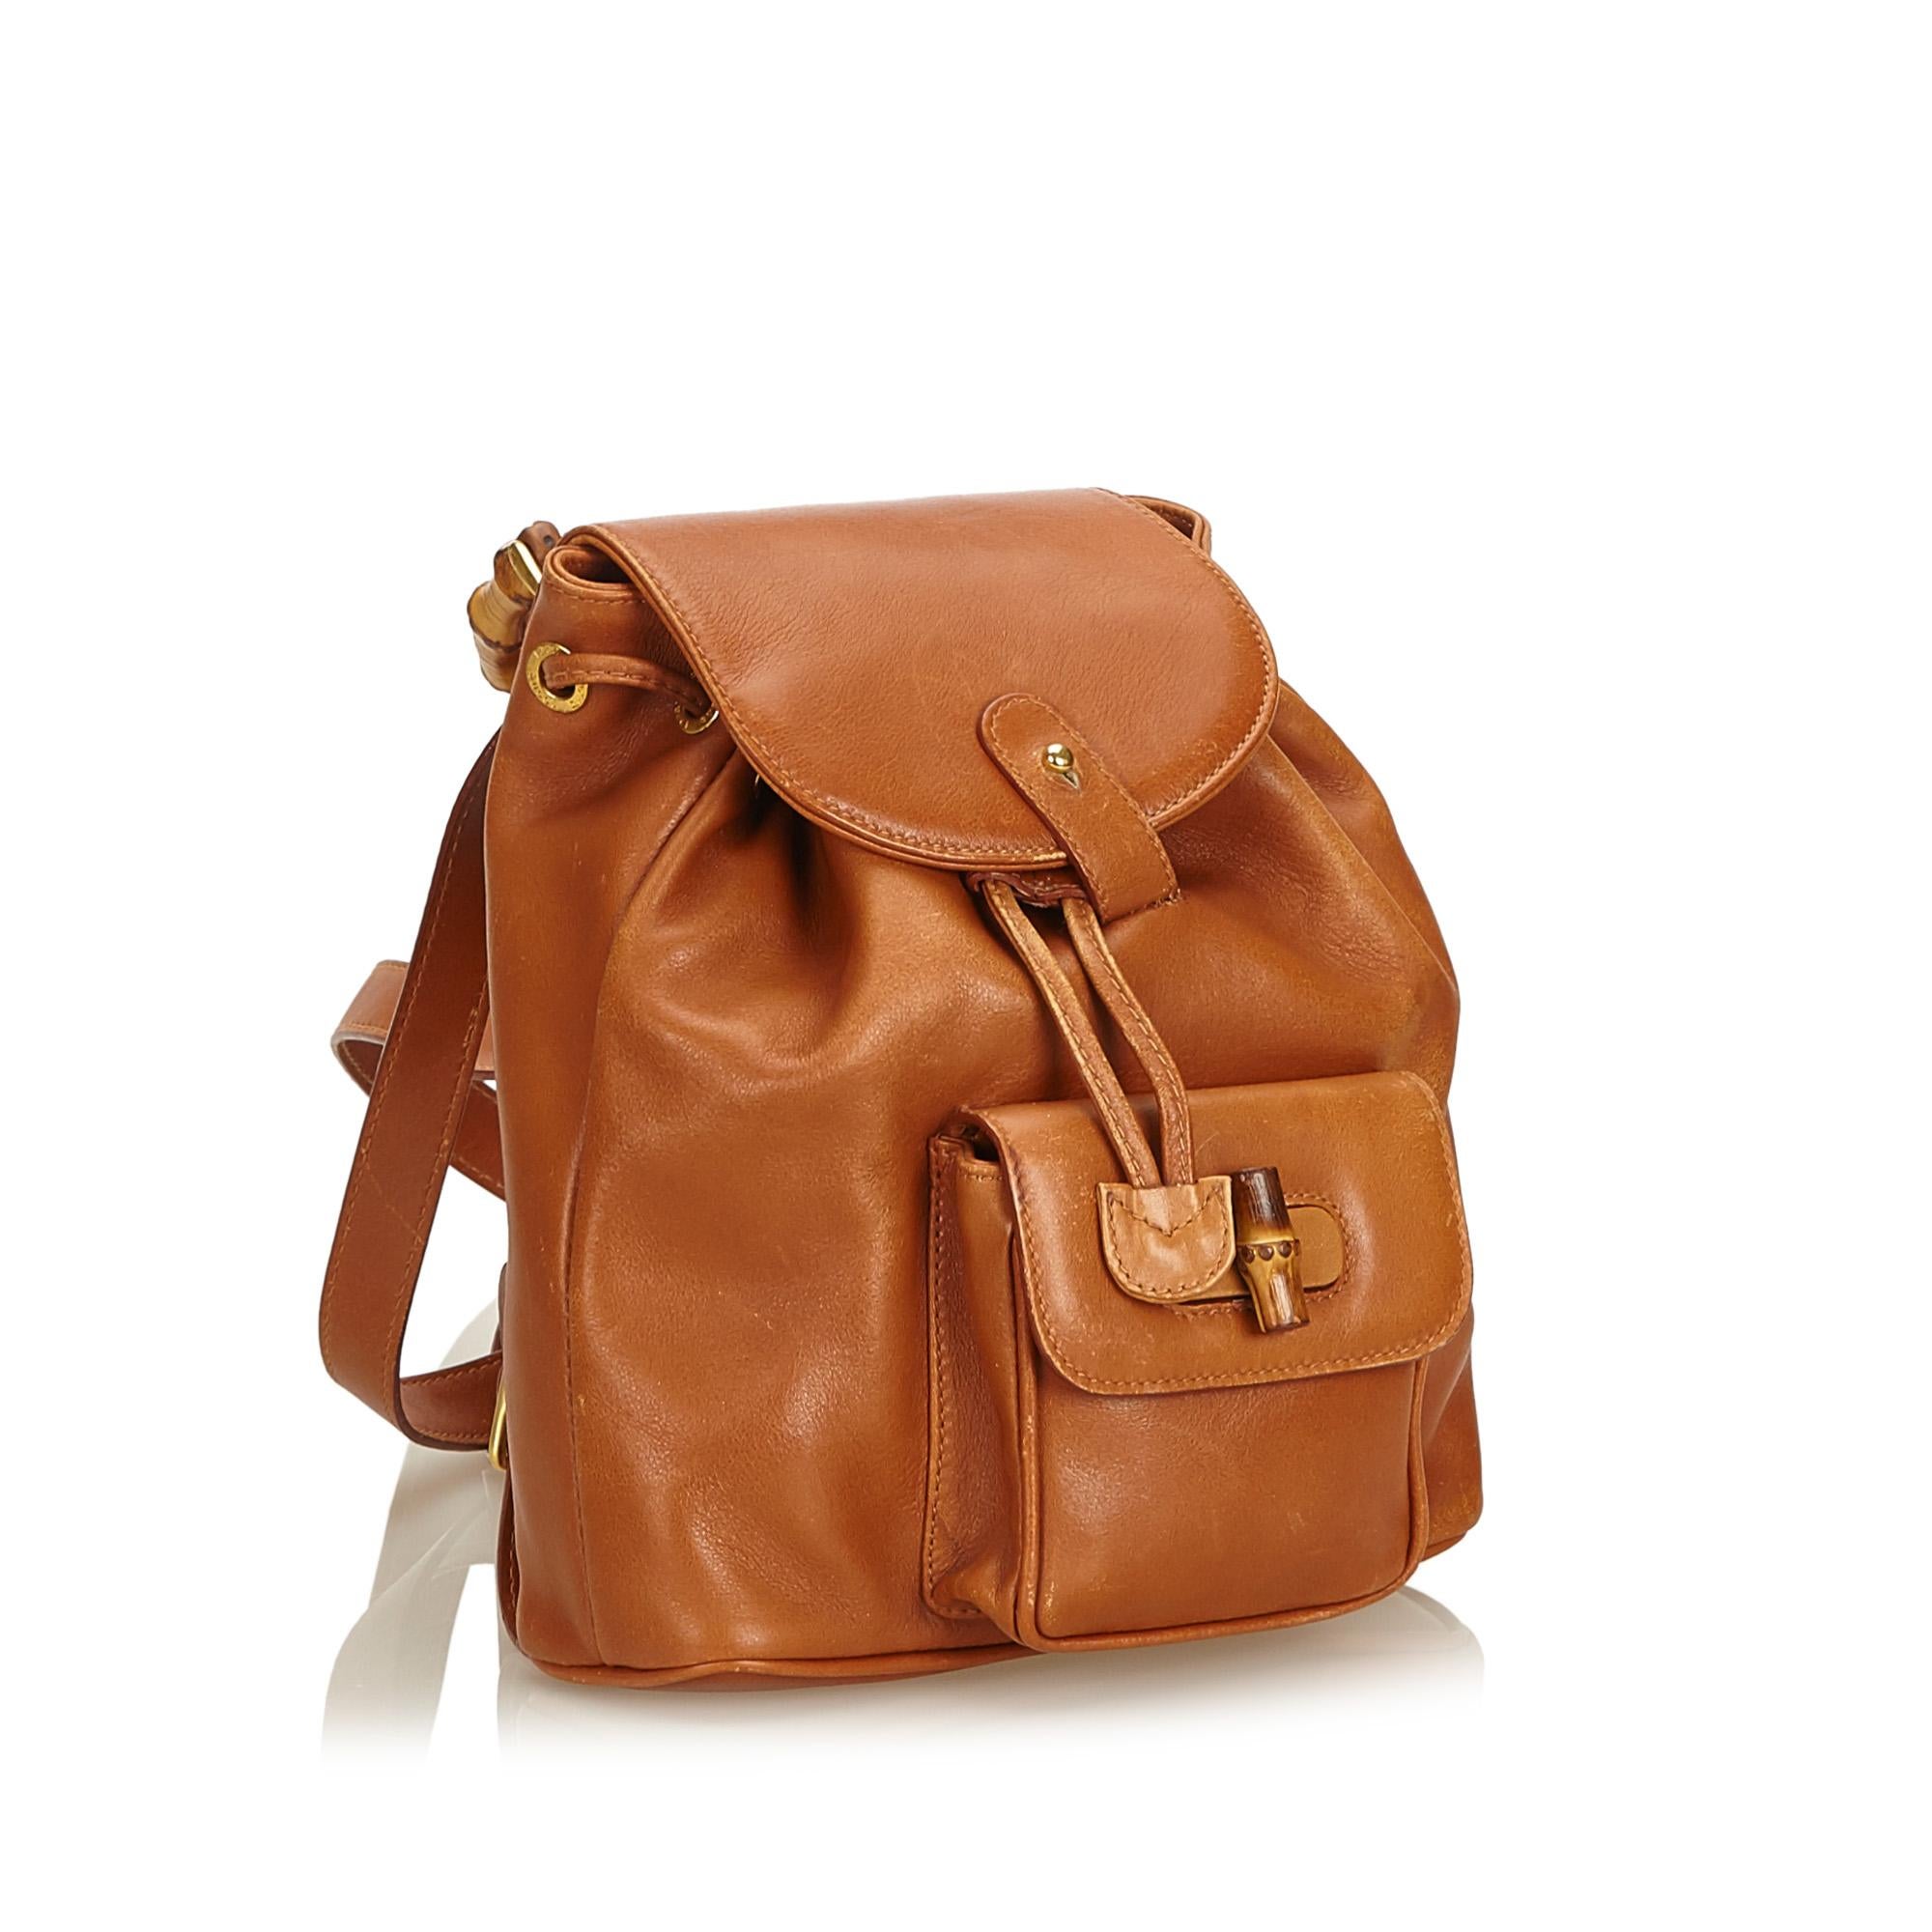 This vintage Gucci mini backpack features a tan leather body, flat back straps, bamboo top handle, top flap, drawstring closure, exterior flap pocket with bamboo twist lock closure, and interior zip pocket.